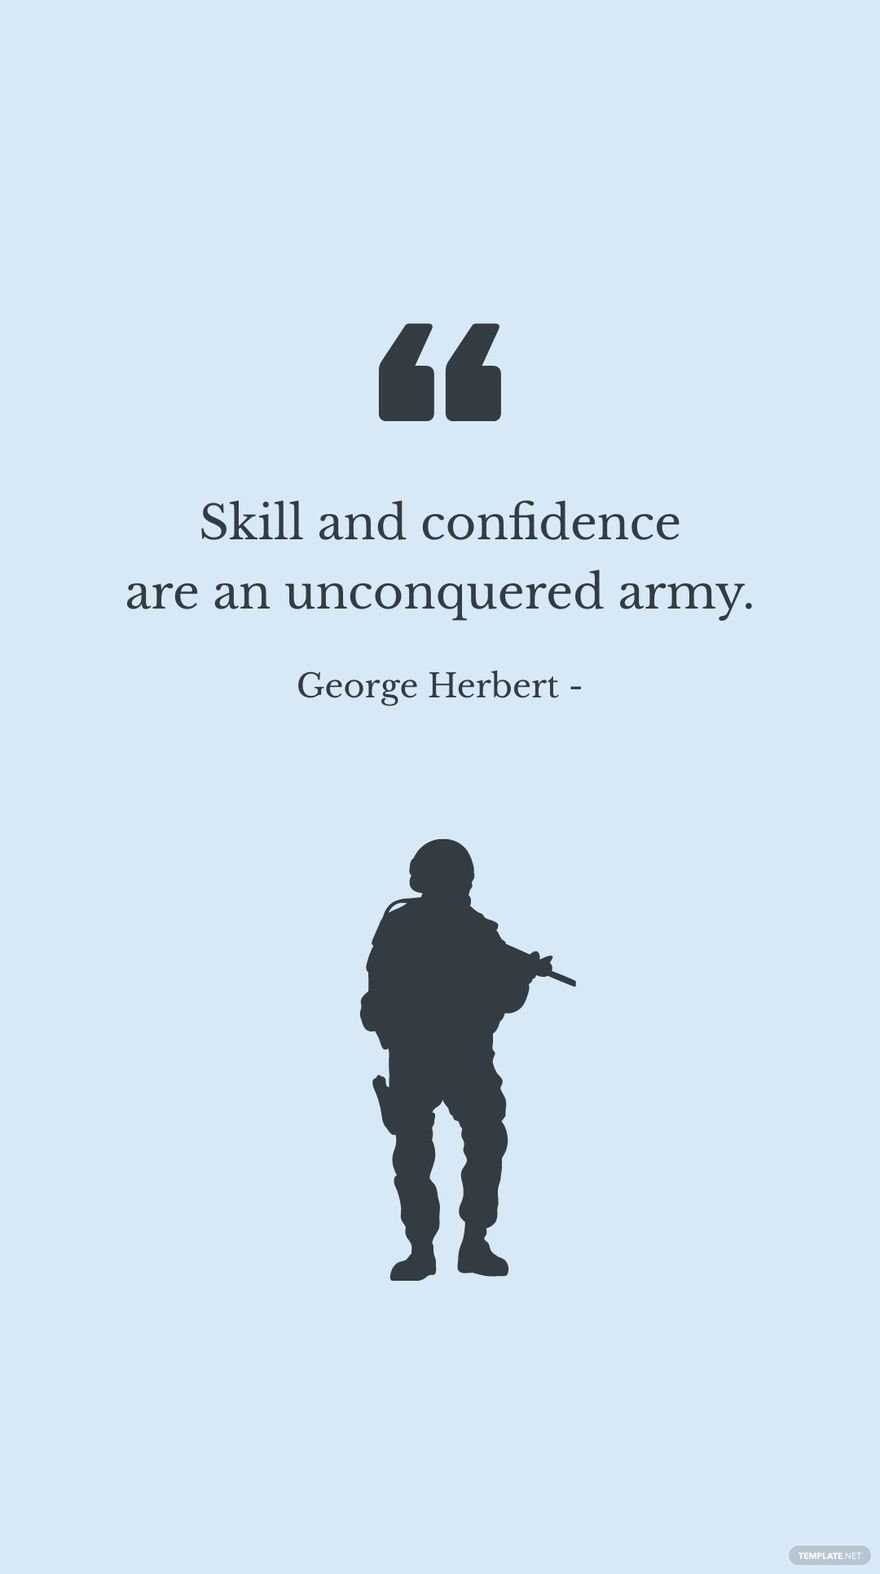 George Herbert - Skill and confidence are an unconquered army.